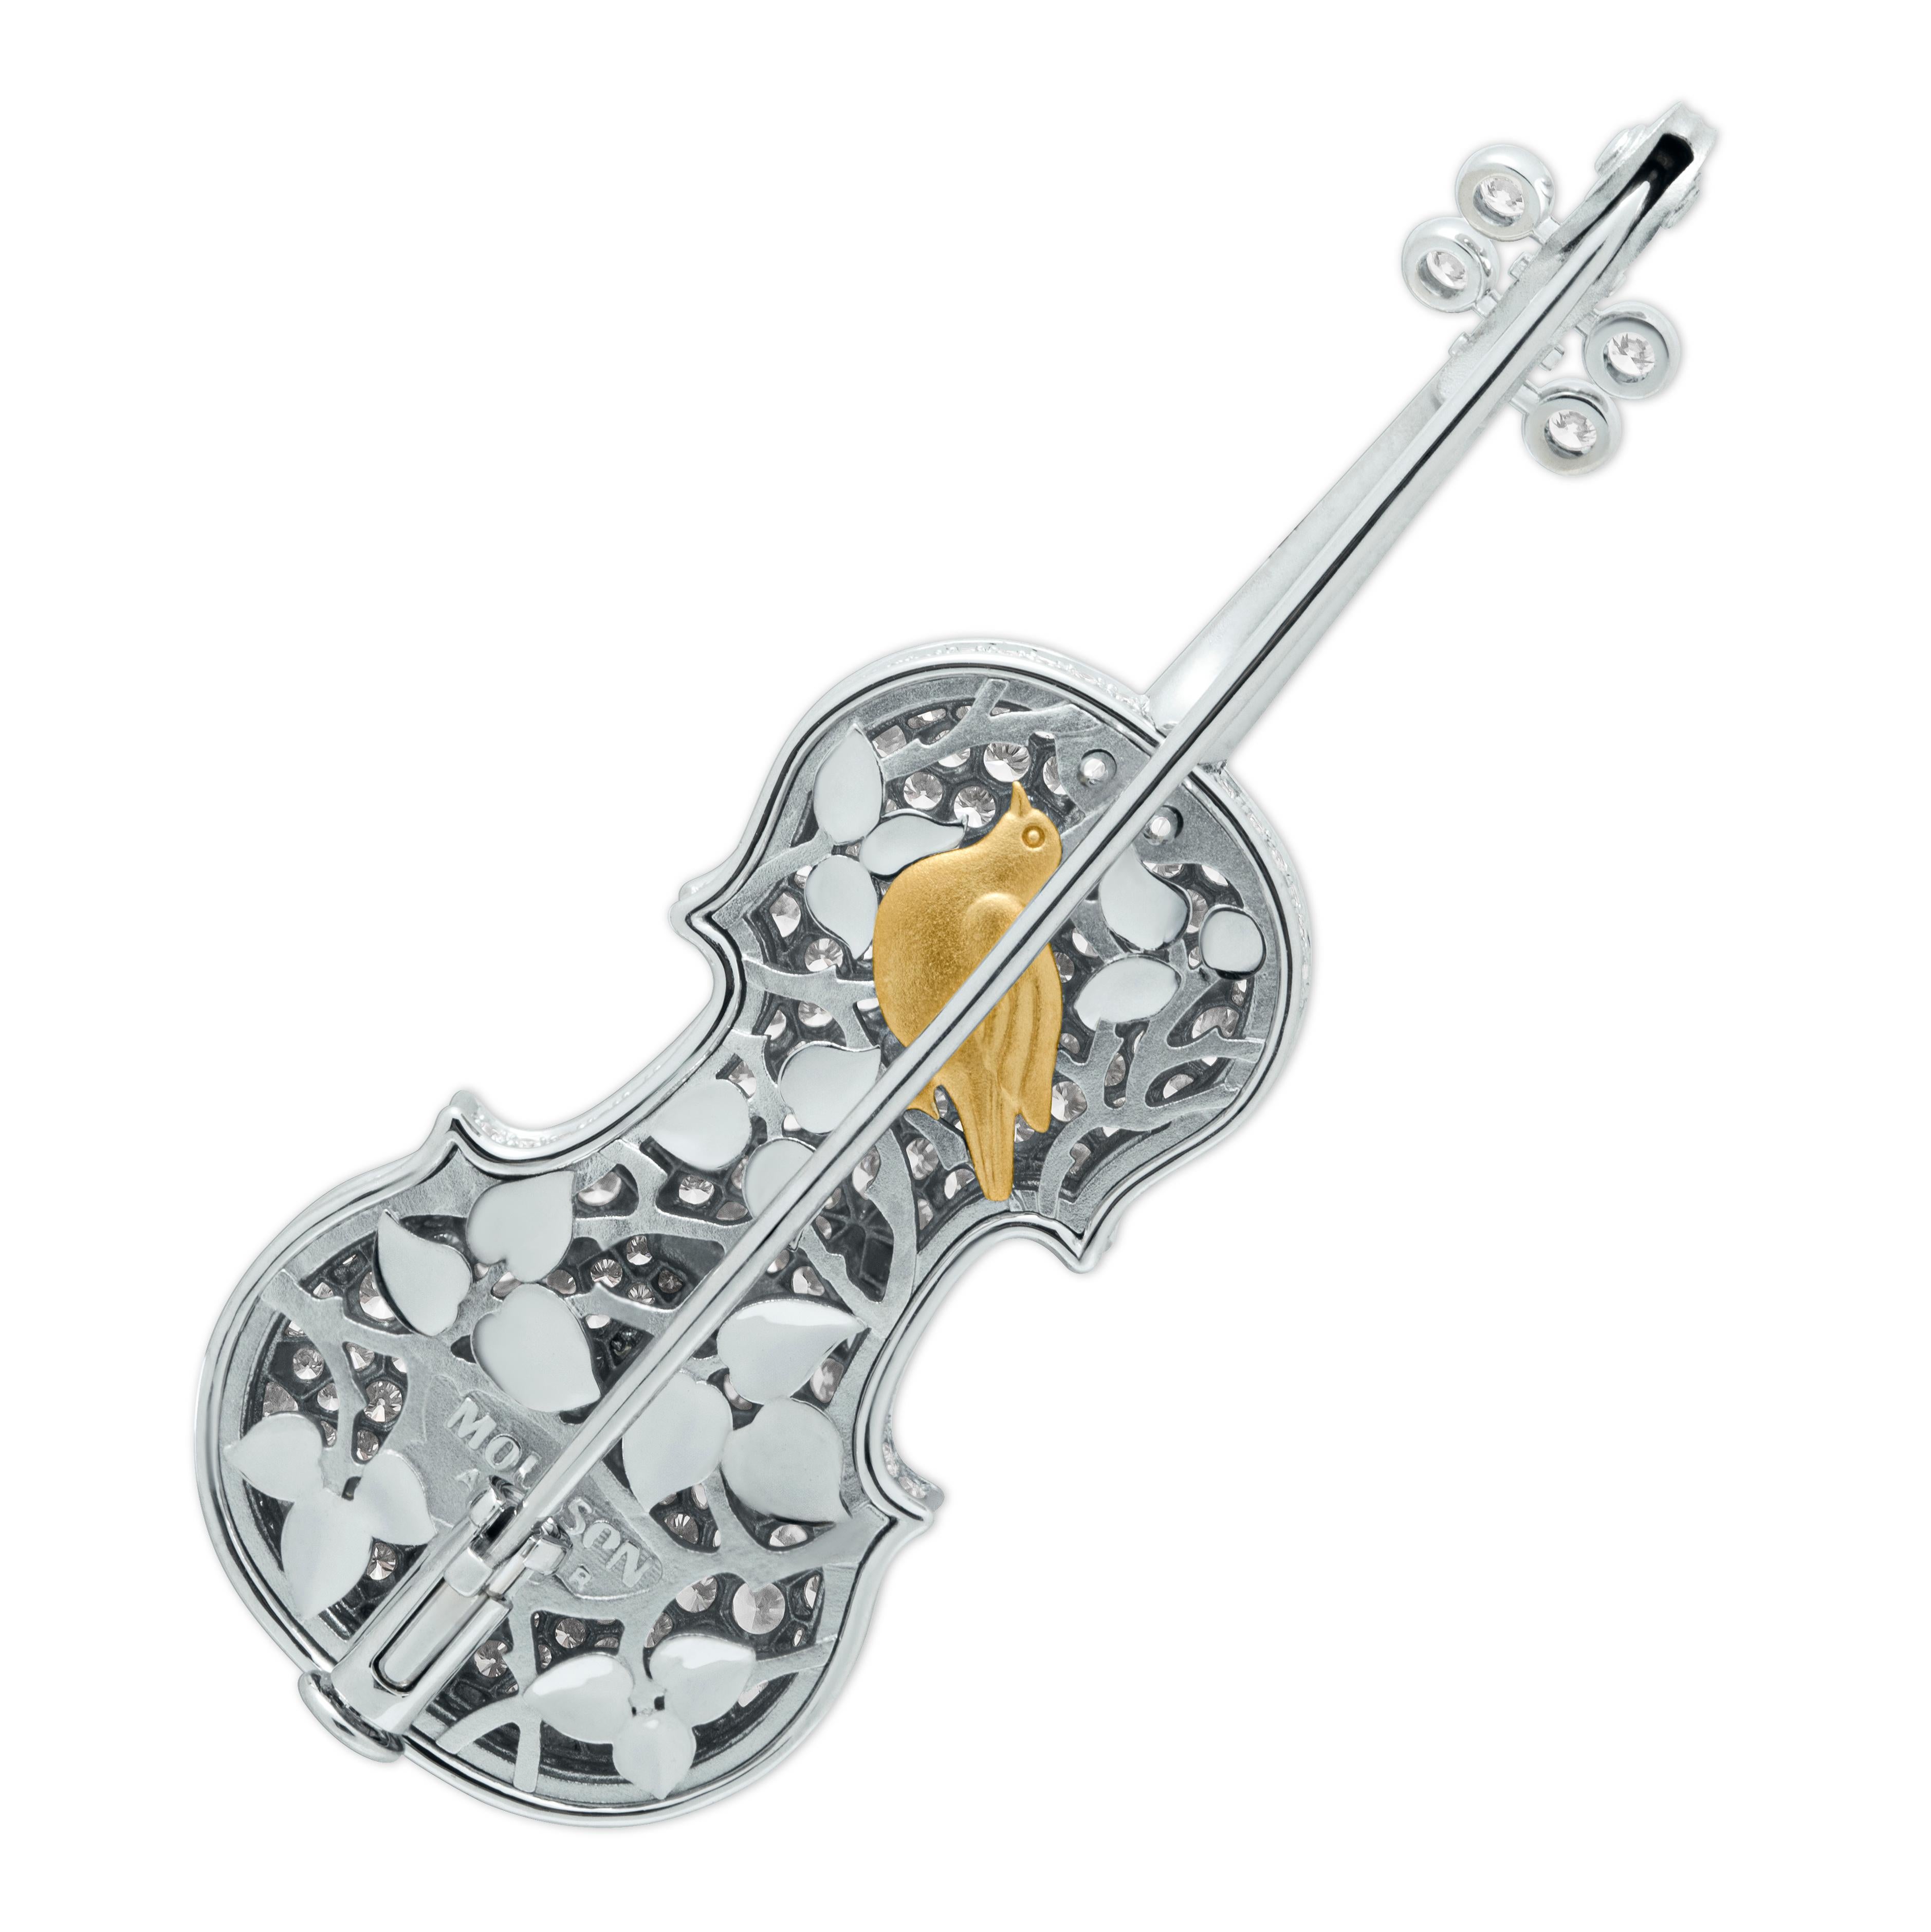 Classical Diamonds 18 Karat White Gold Violin Brooch

Get ready to feel fancy and proud with Mousson Atelier's 18K White Gold and Diamond Violin Brooch. Every element, from the delicate gold strings to the expert craftsmanship, is made to wow. And